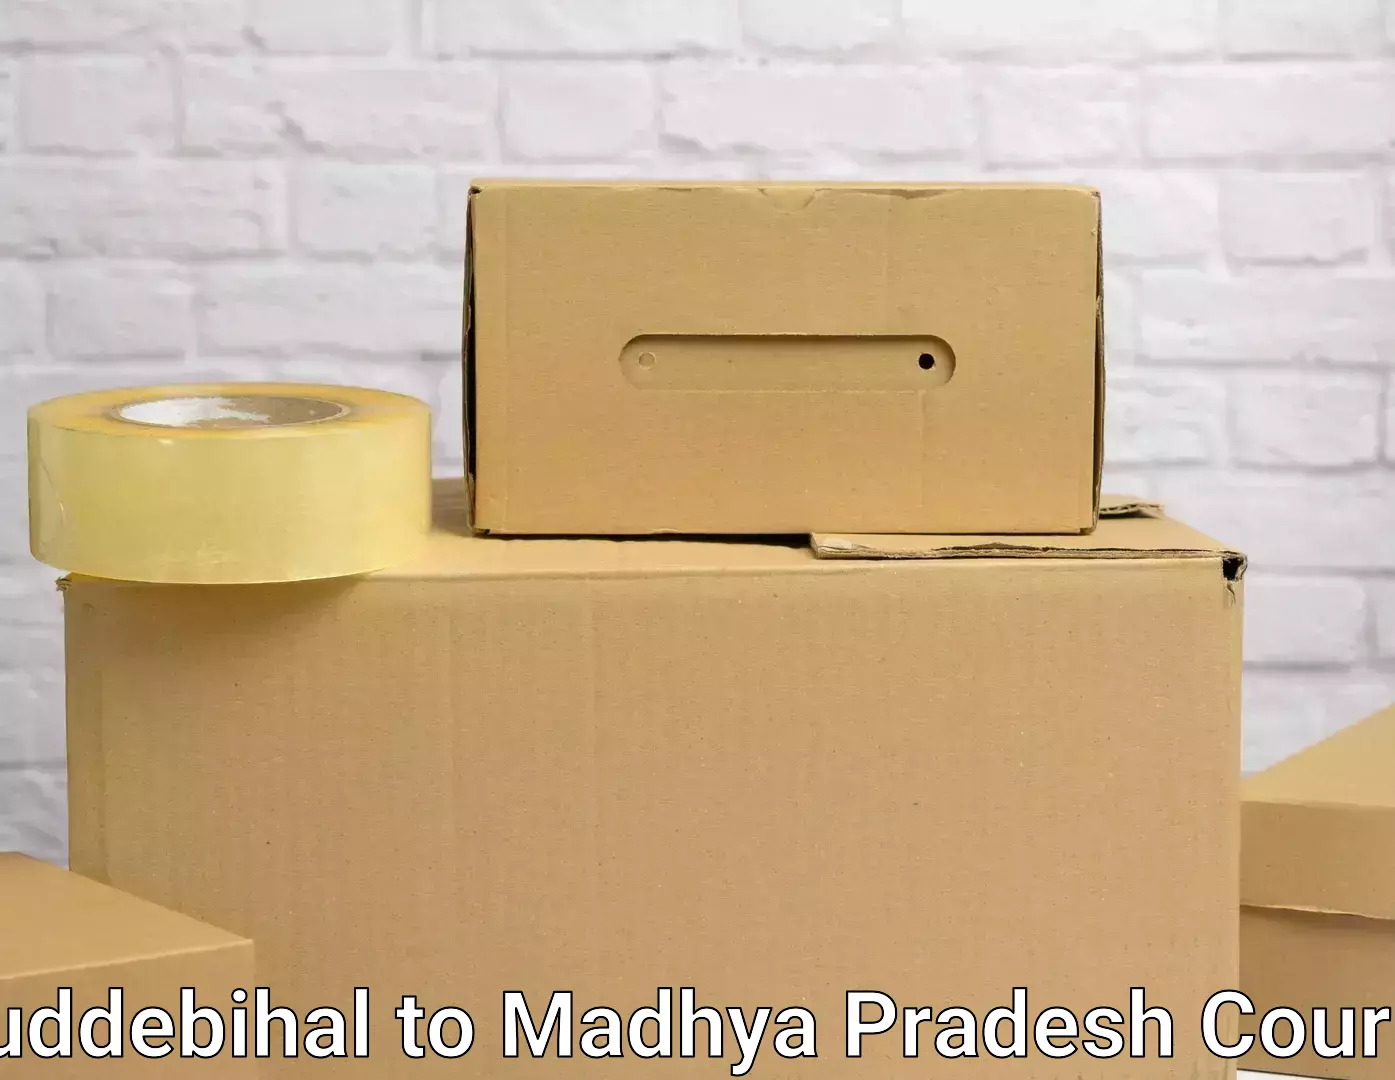 Reliable furniture transport in Muddebihal to Udaipura